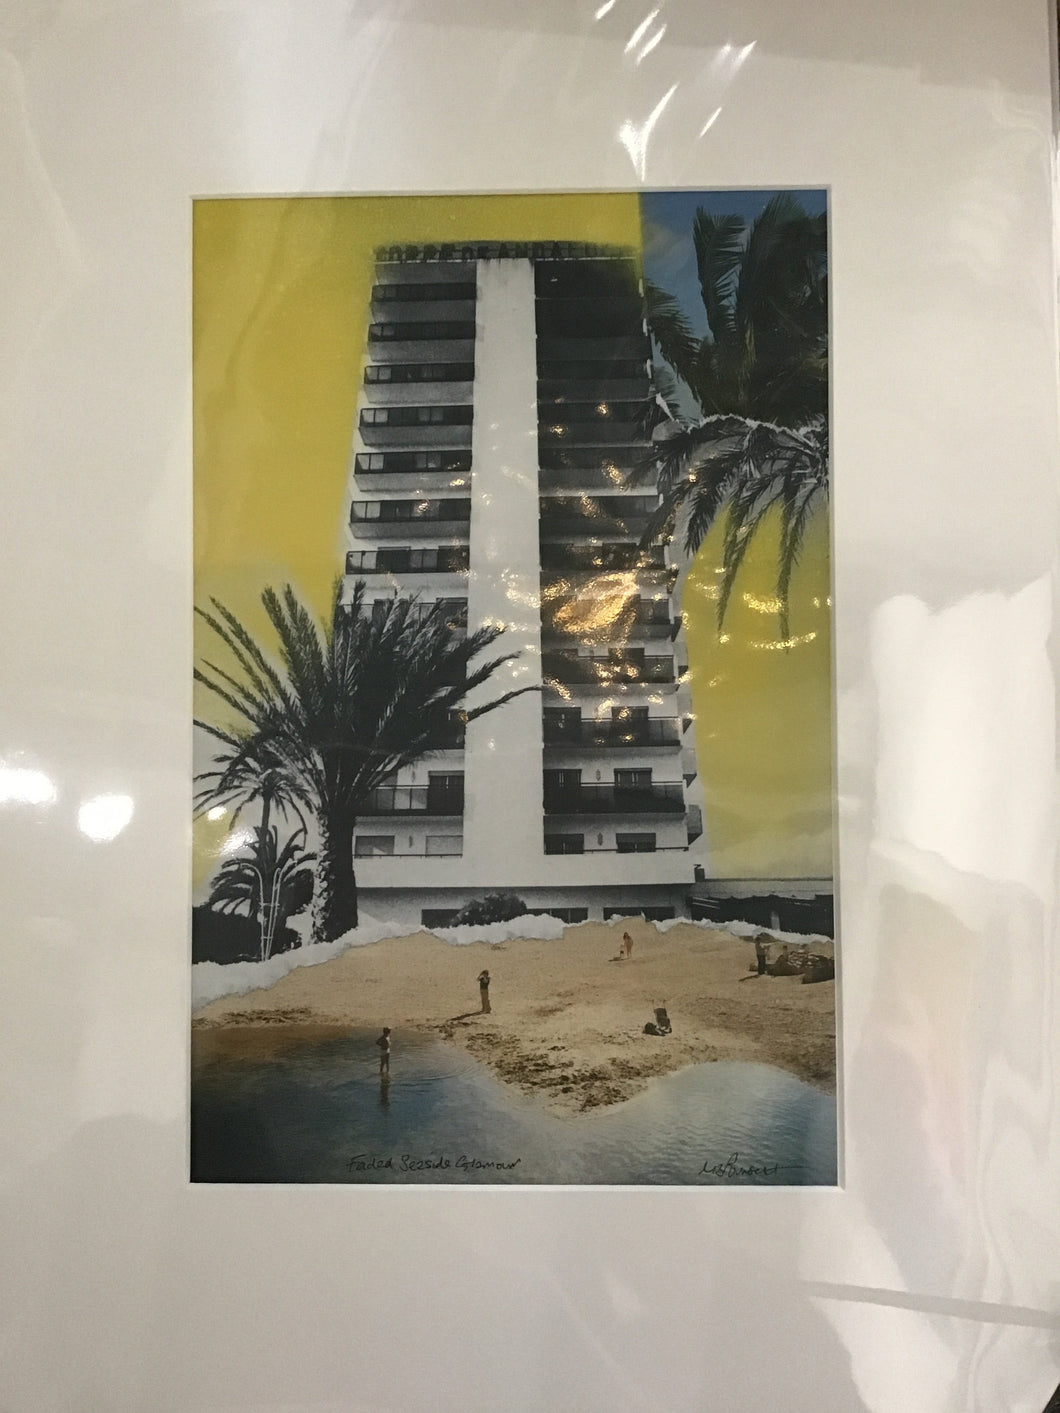 Liz Pounsett - Faded Seaside Glamour Yellow - Print from a collage